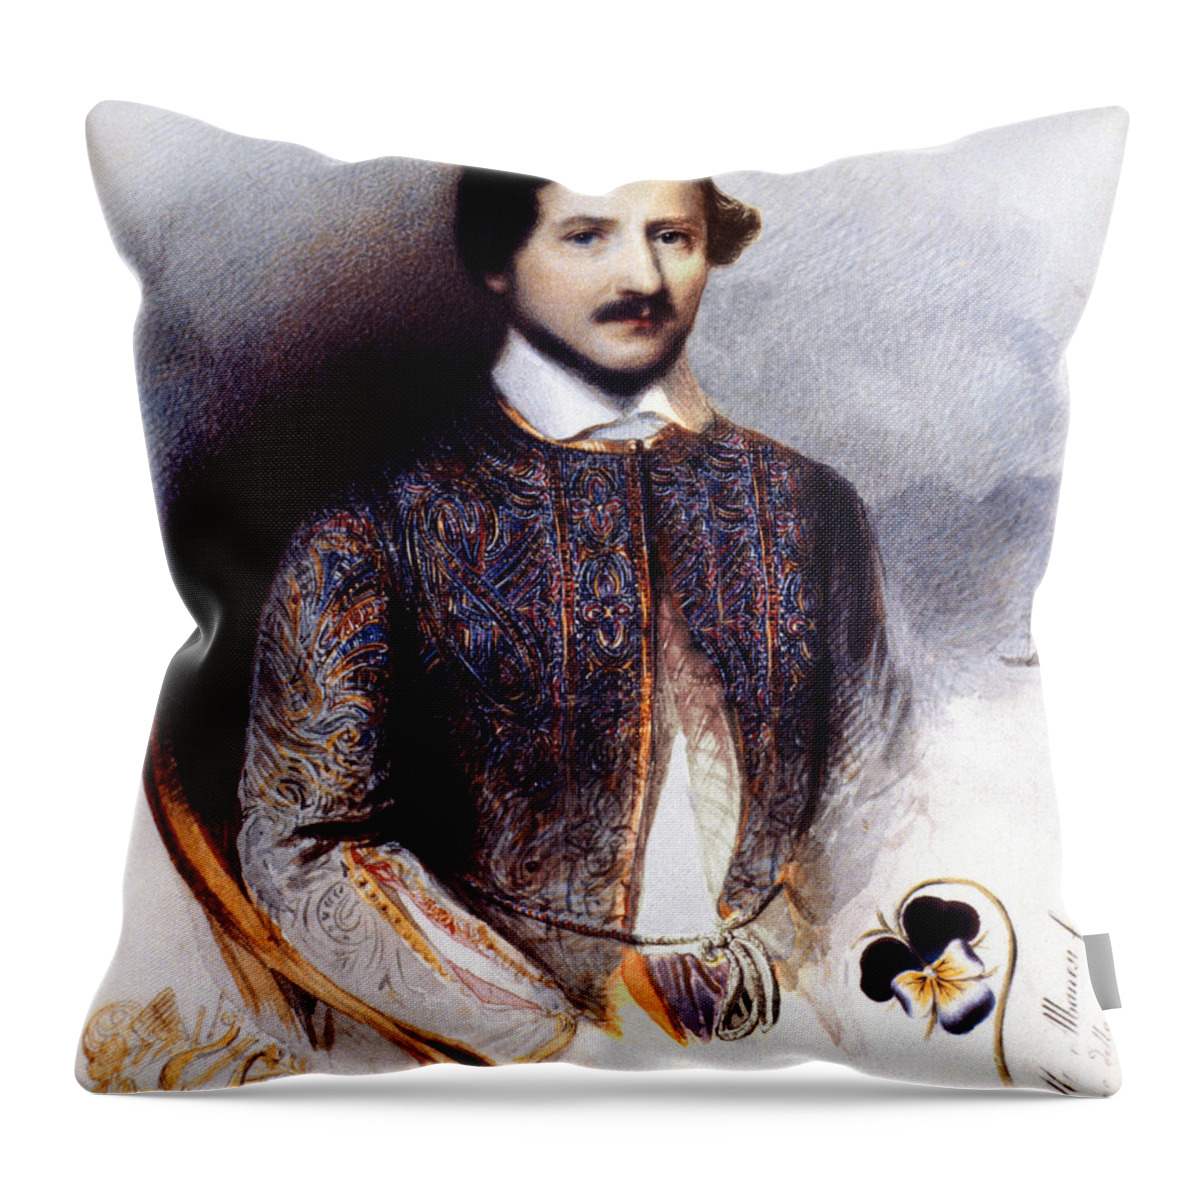 1844 Throw Pillow featuring the painting Gaetano Donizetti by Granger